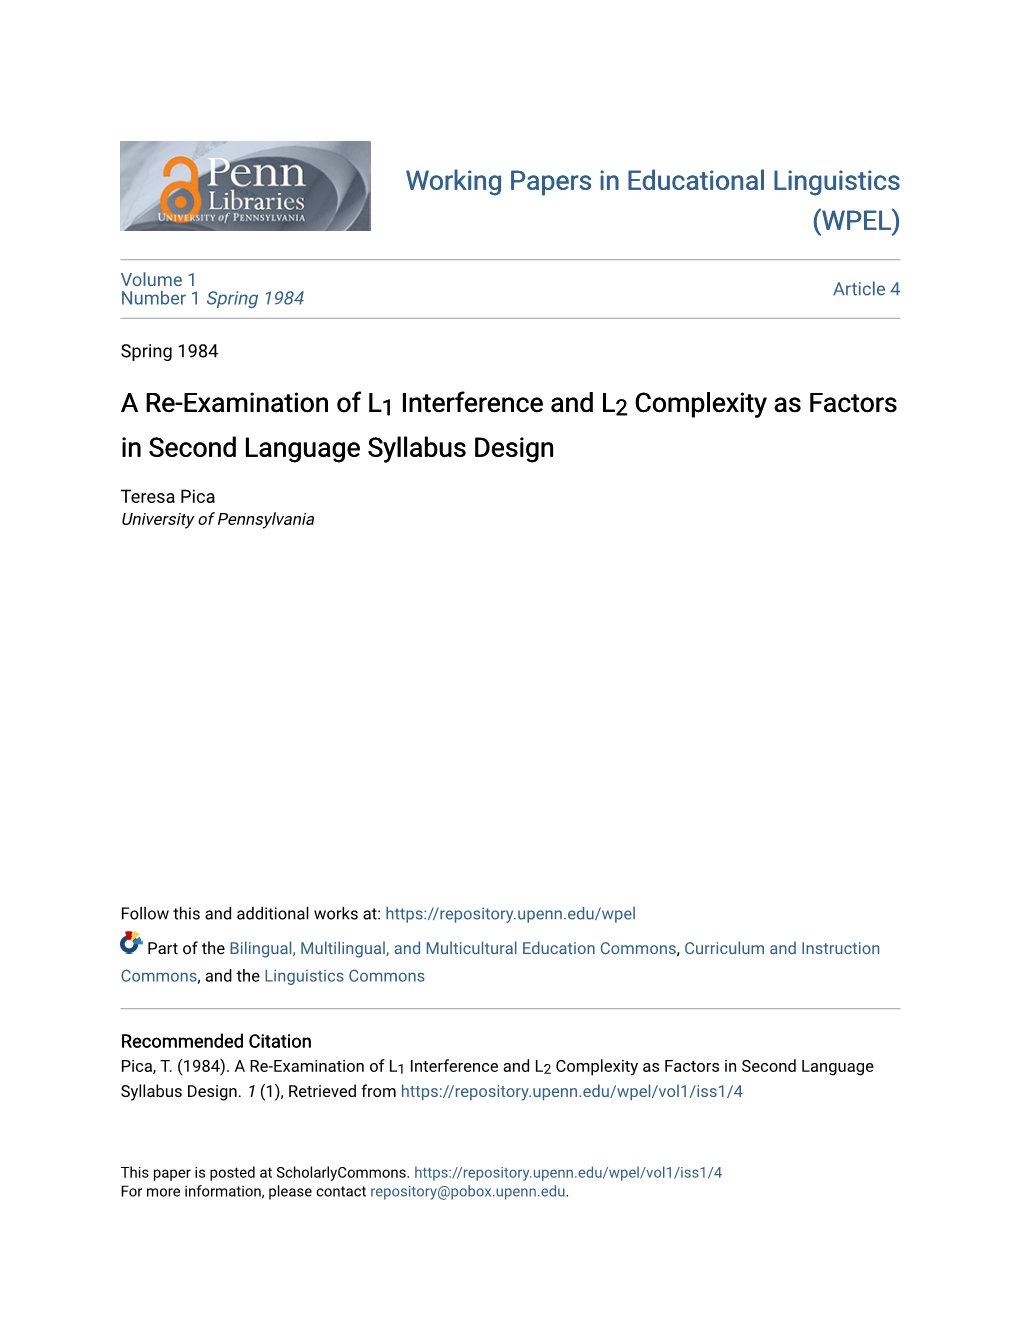 A Re-Examination of L1 Interference and L2 Complexity As Factors in Second Language Syllabus Design